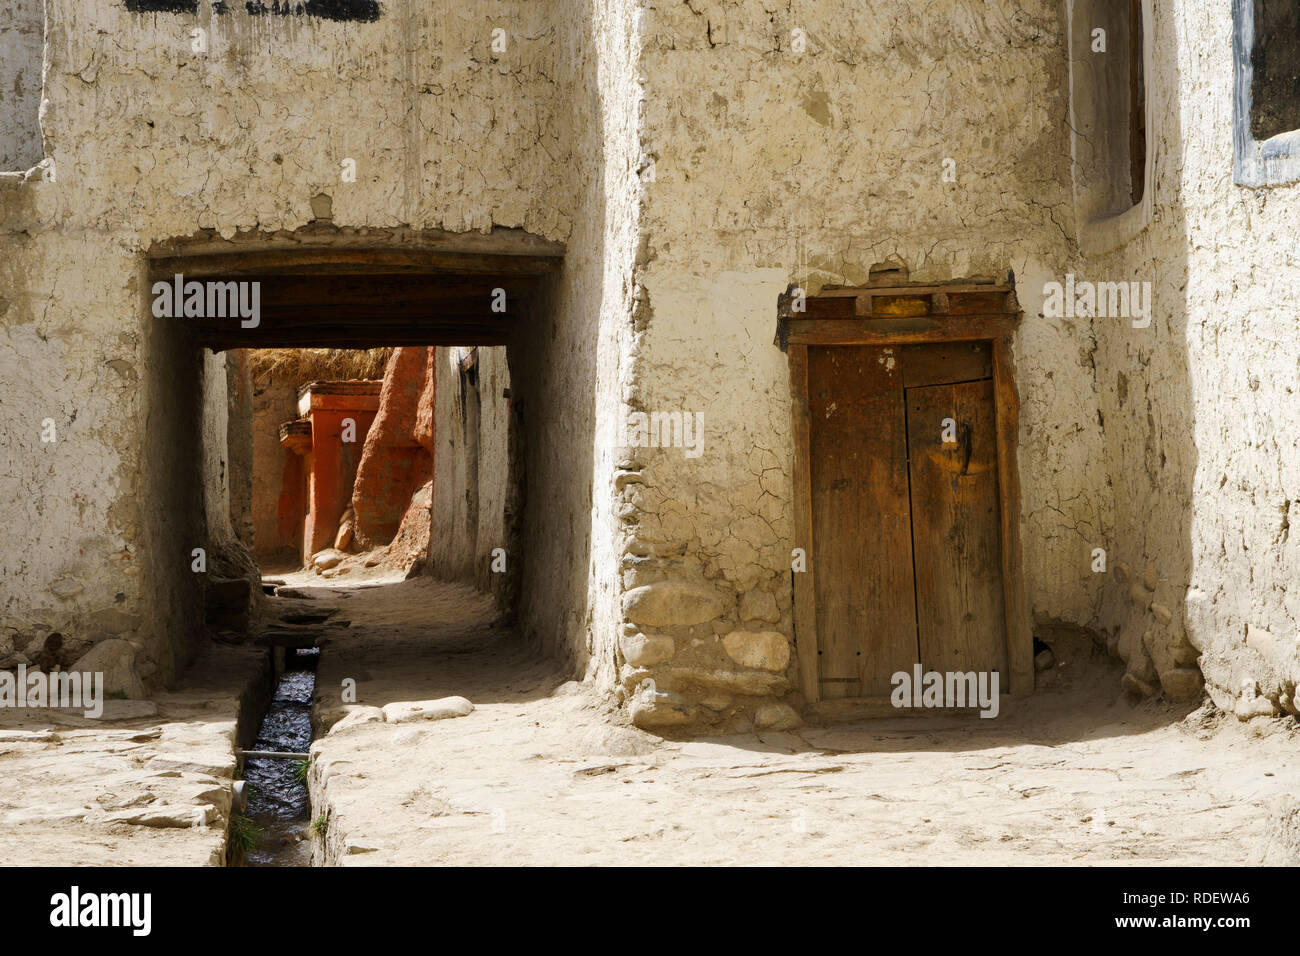 Ancient Tibetan house and passage in the fortified city of Lo Manthang, Upper Mustang region, Nepal. Stock Photo